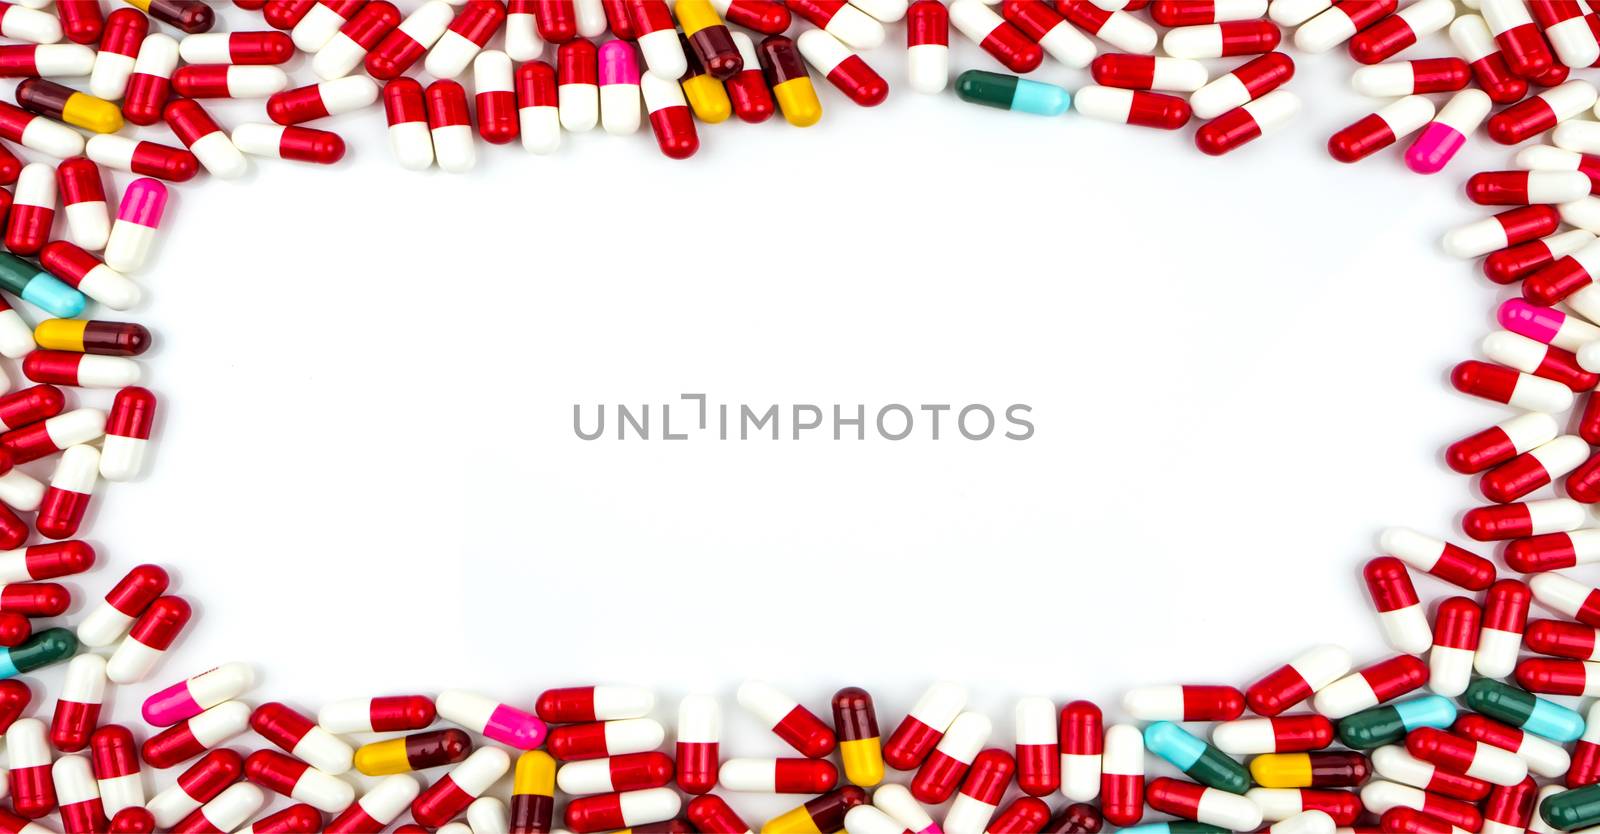 Colorful of antibiotics capsule pills rectangle frame on white background with copy space. Drug resistance concept. Antibiotics drug use with reasonable and global healthcare concept. Pharmacy background.